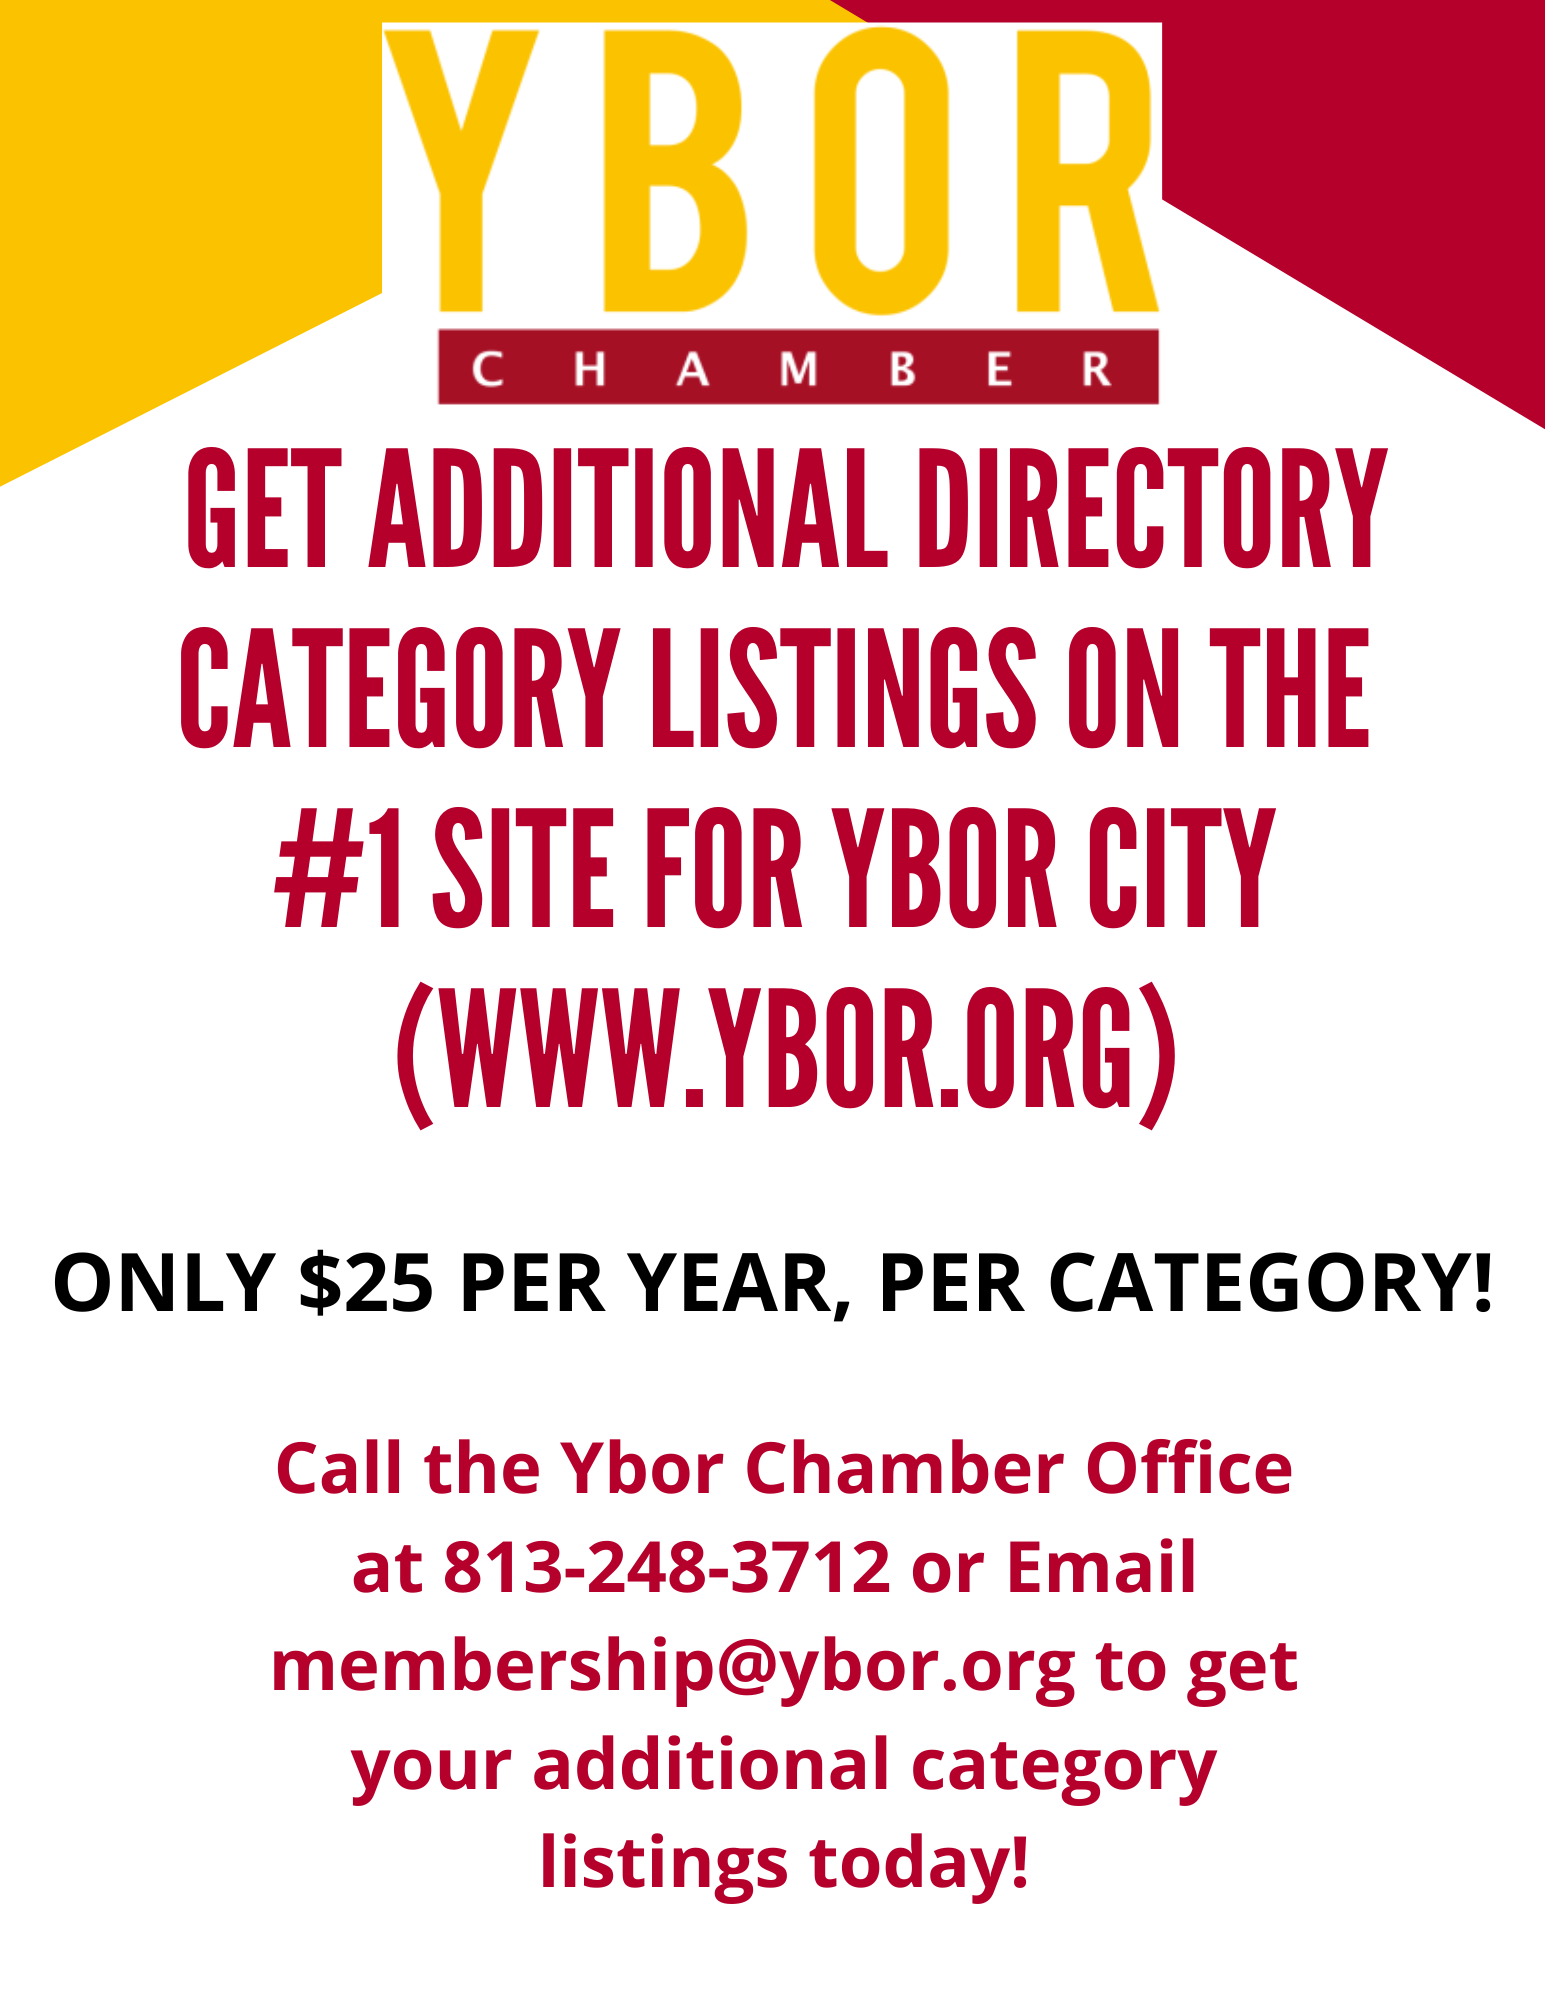 Copy of INCREASE YOUR EXPOSURE WITH AM YBOR CHAMBER E-BLAST AD! (1)